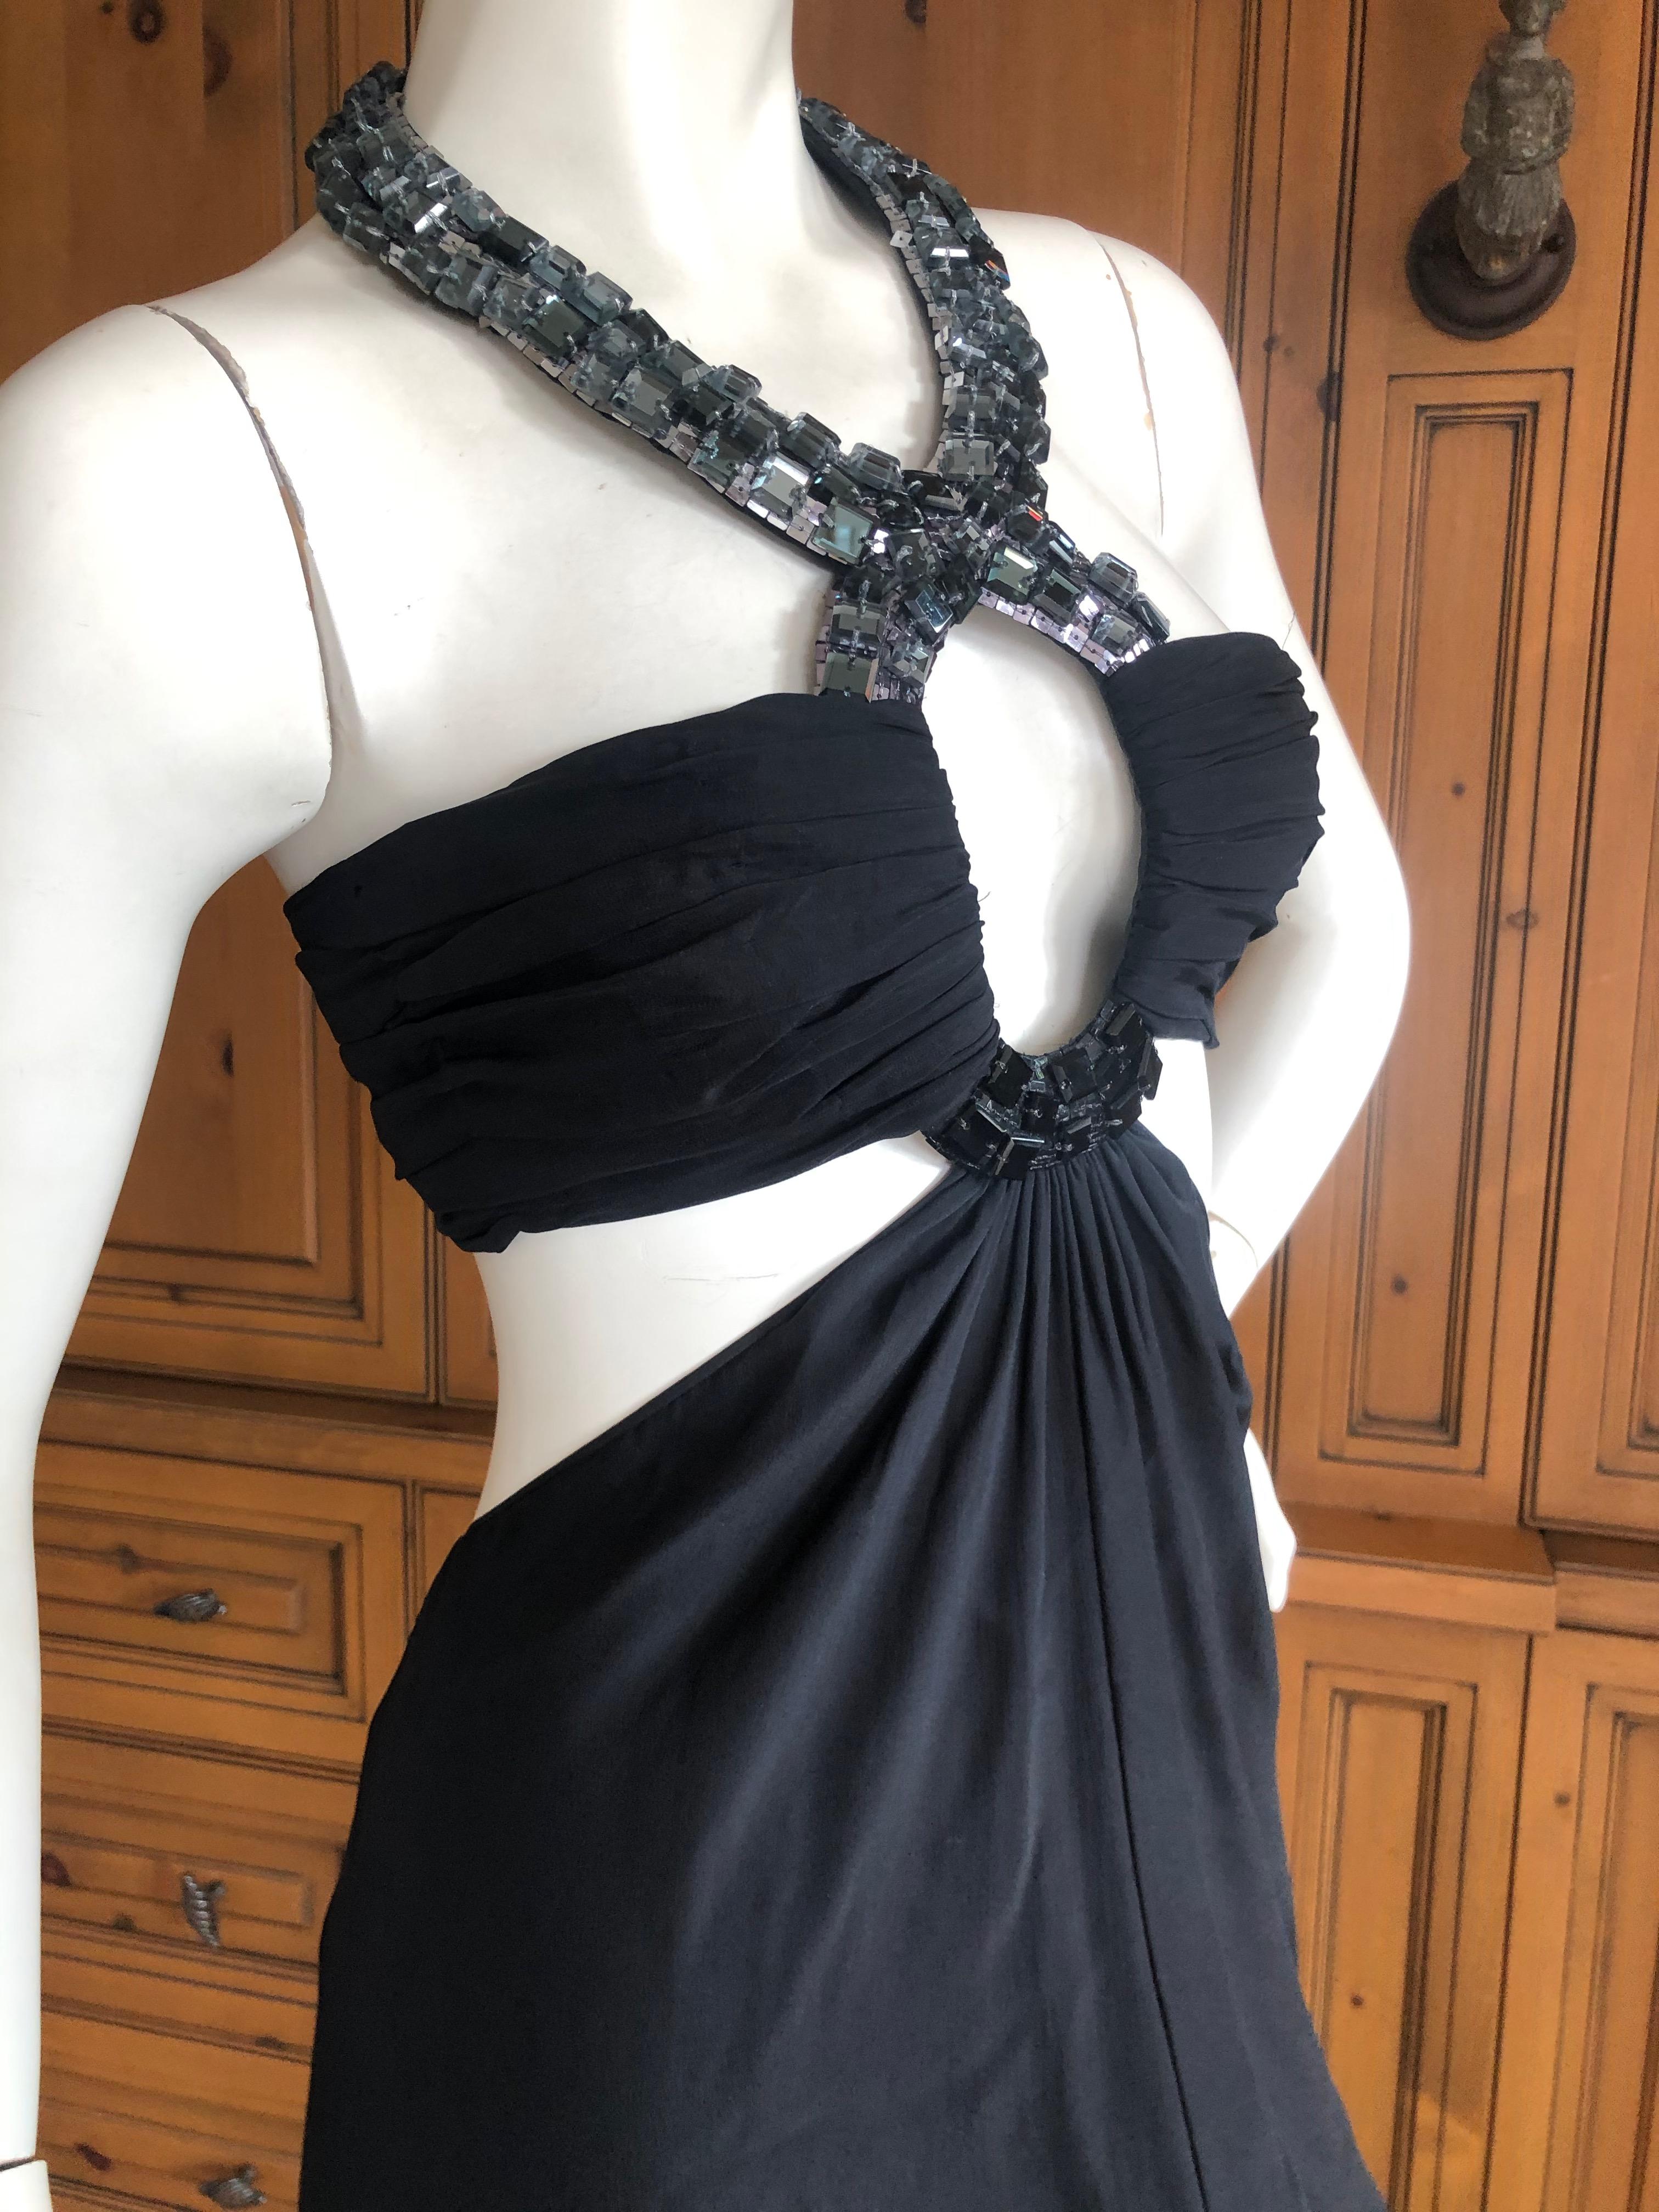 Azzaro Black Cut Out Evening Dress with Bold Crystal Jewel Details For Sale 4